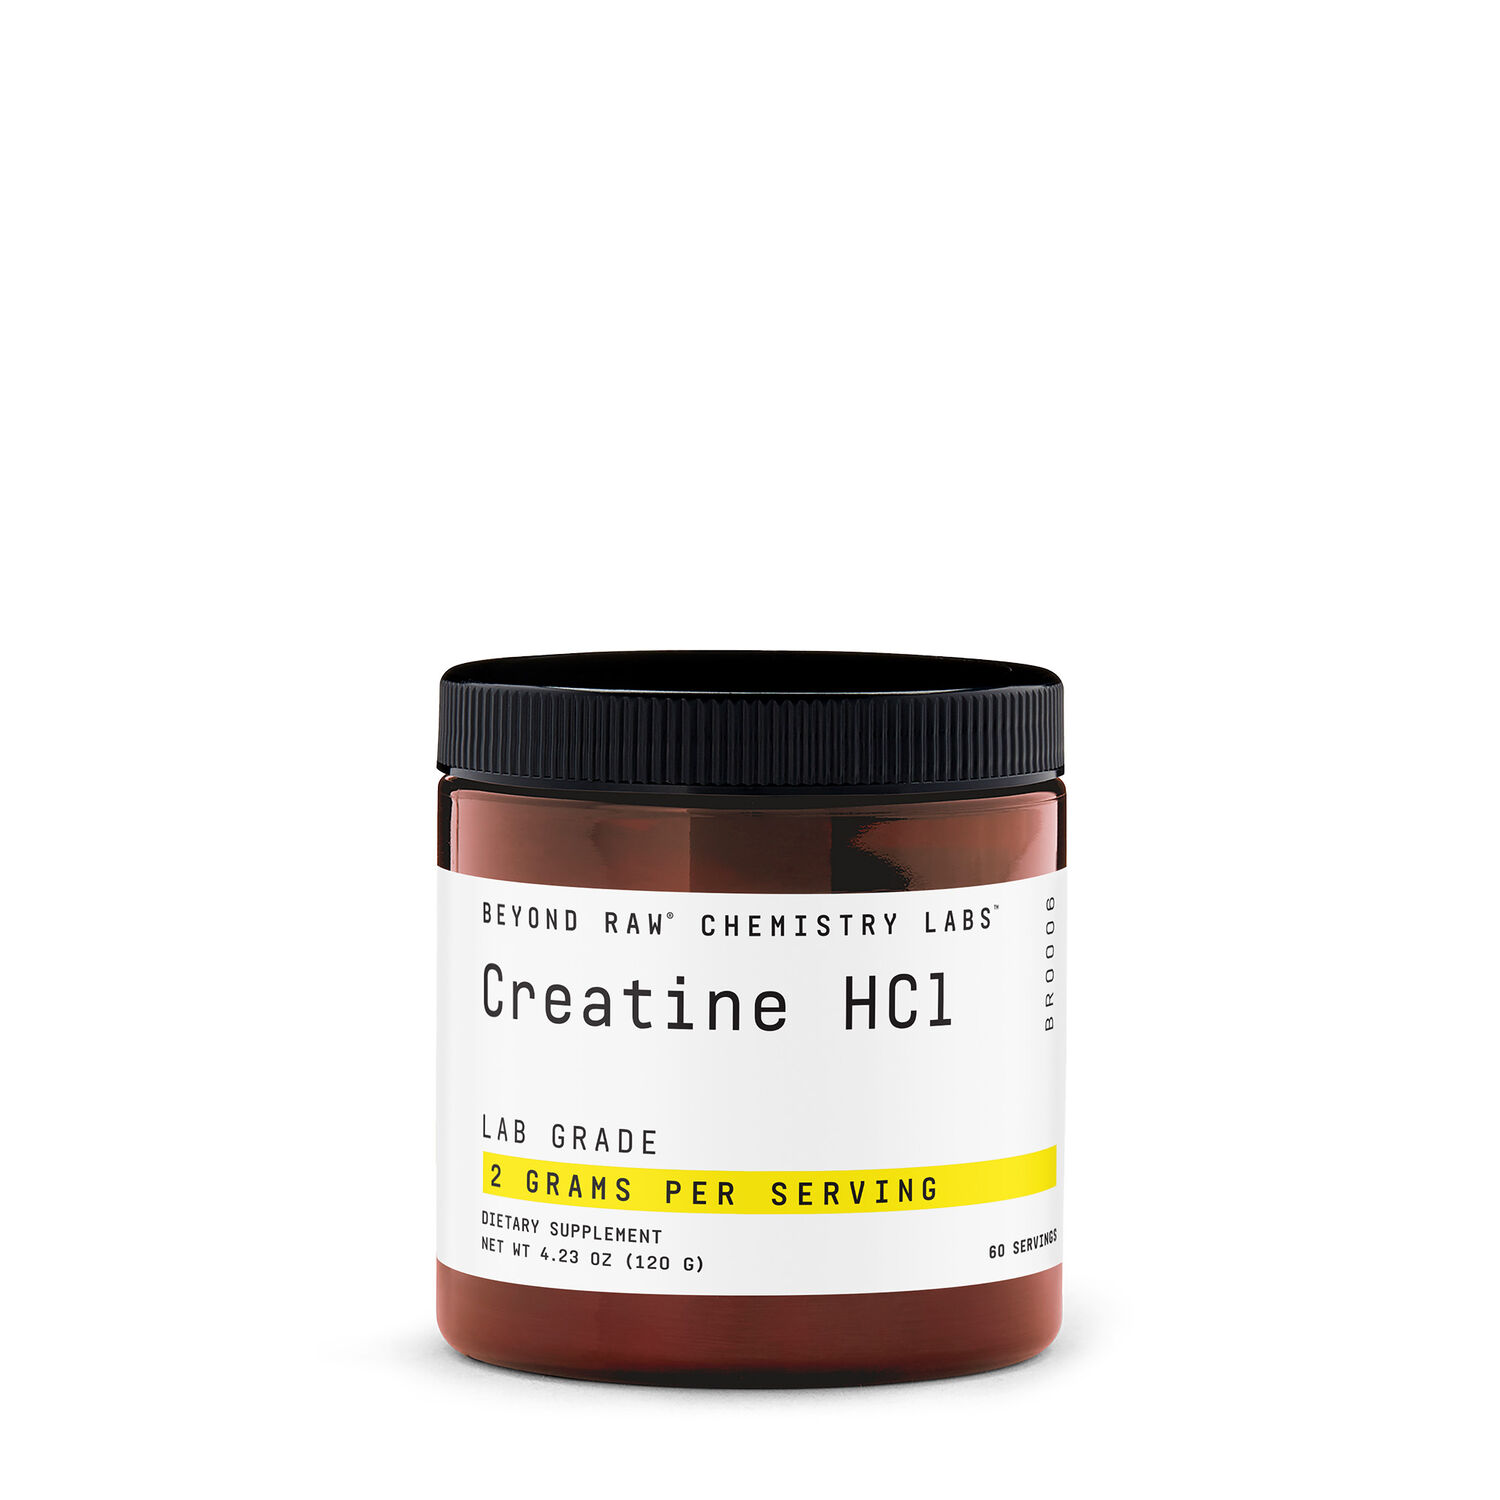 Beyond Raw Chemistry Labs Creatine Hcl (60 Servings)